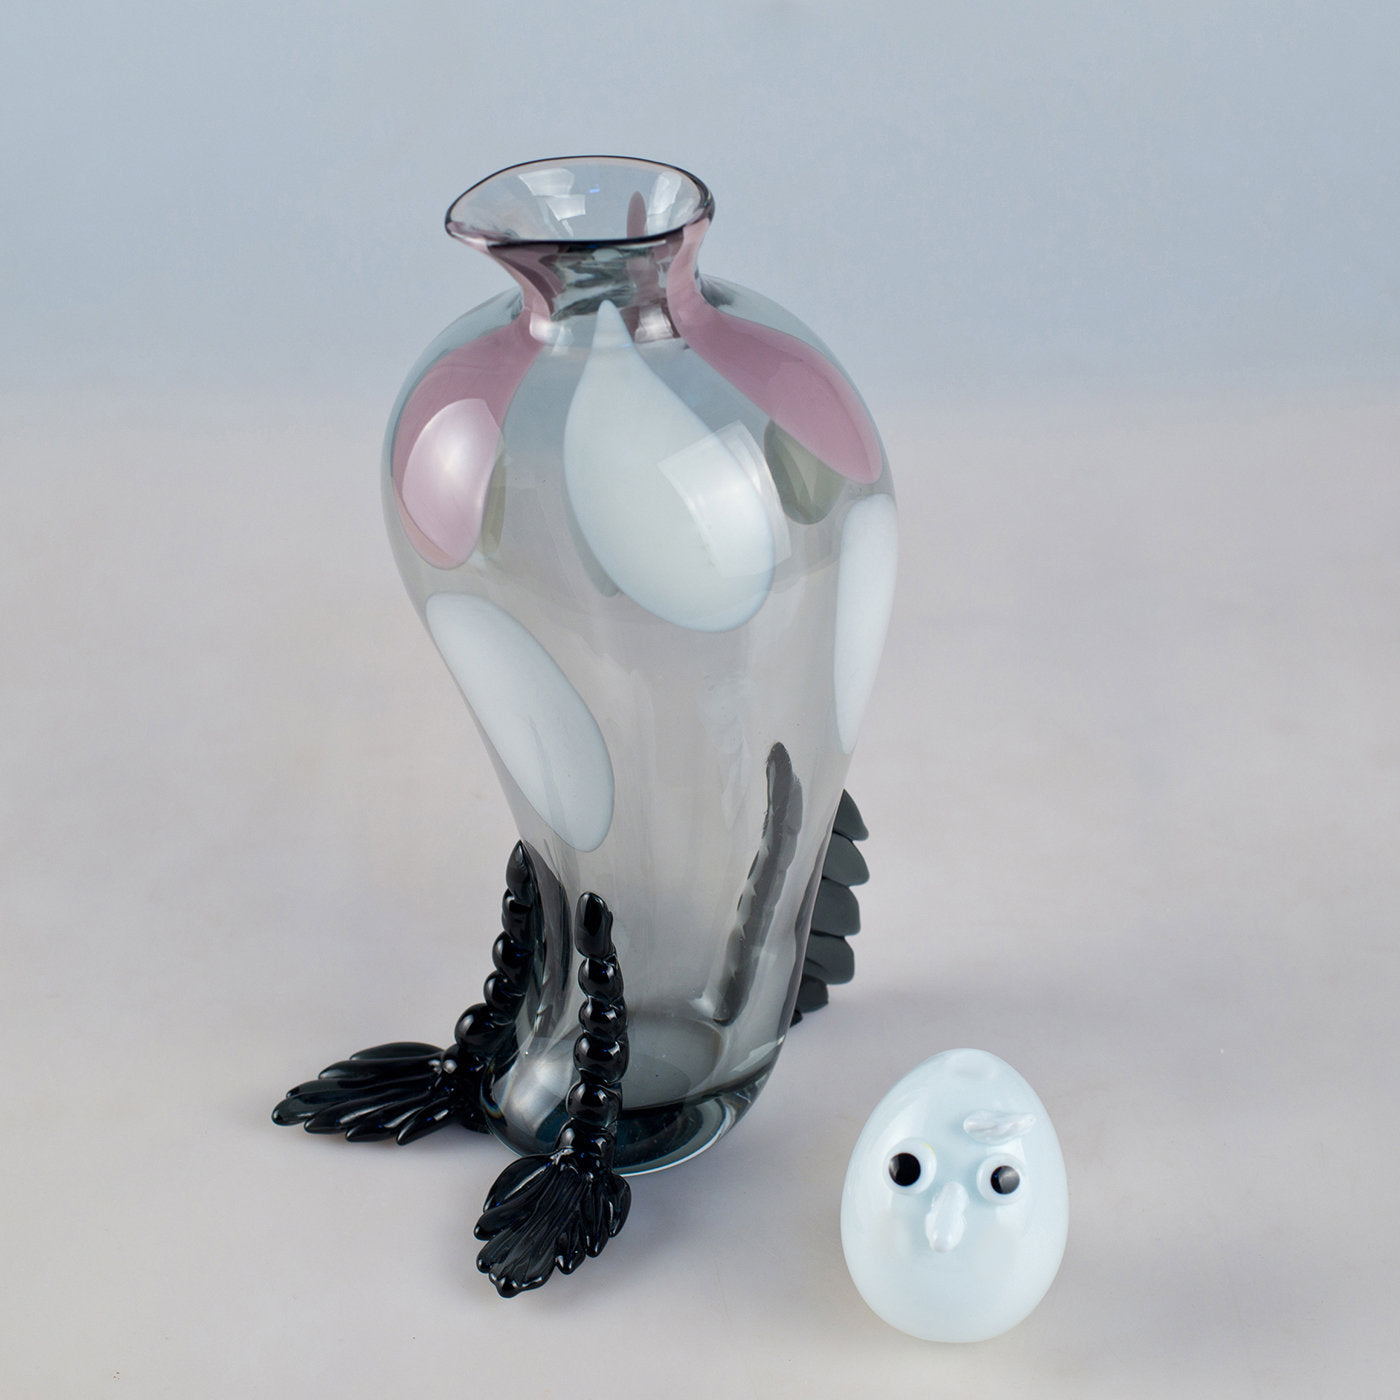 Spotted Pigeon Venetian Glass Sculpture by Eliana Gerotto - Alternative view 2